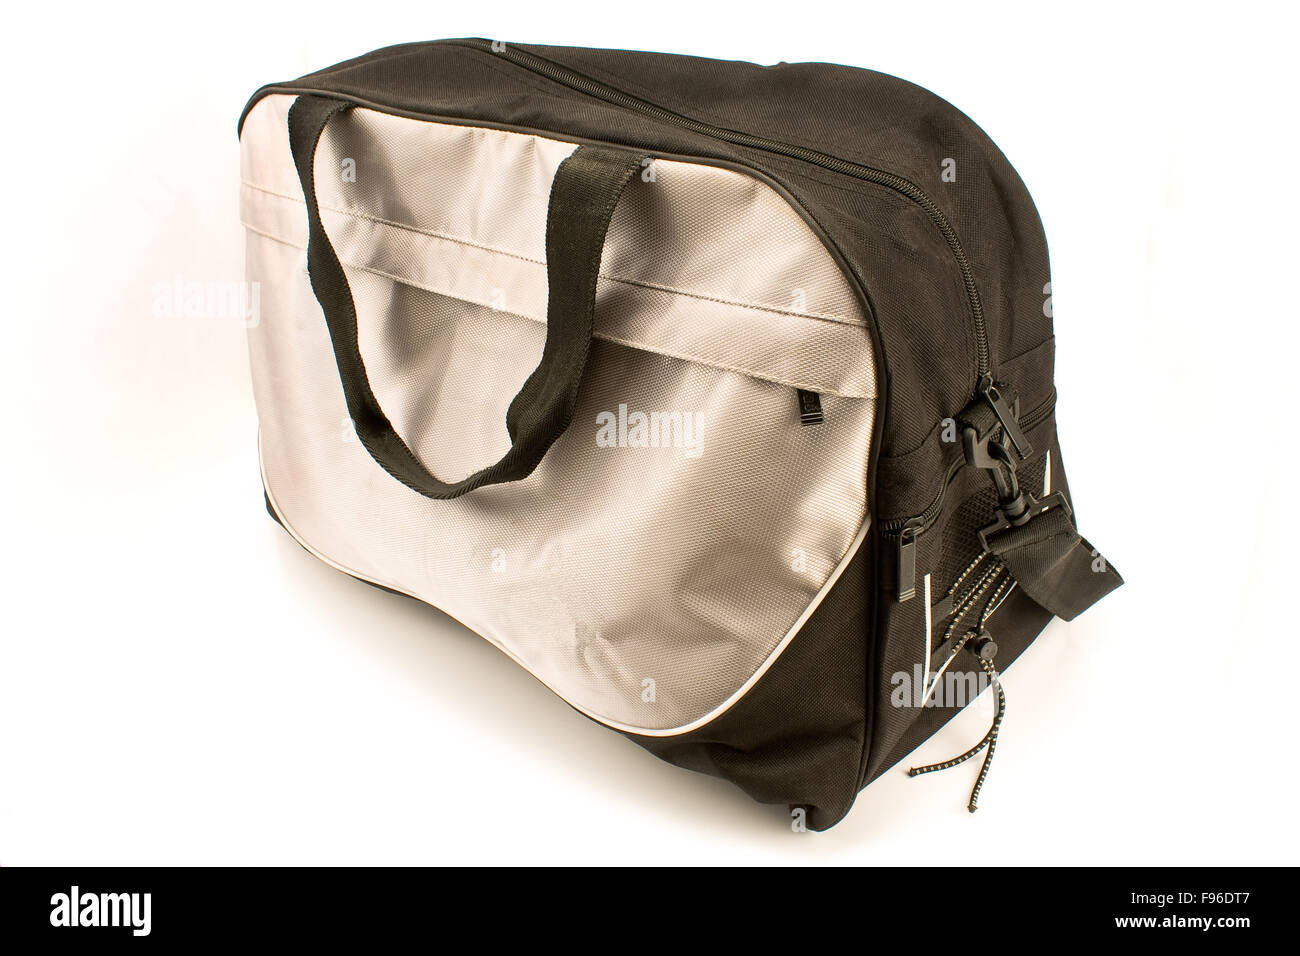 Sport bag isolated Stock Photo